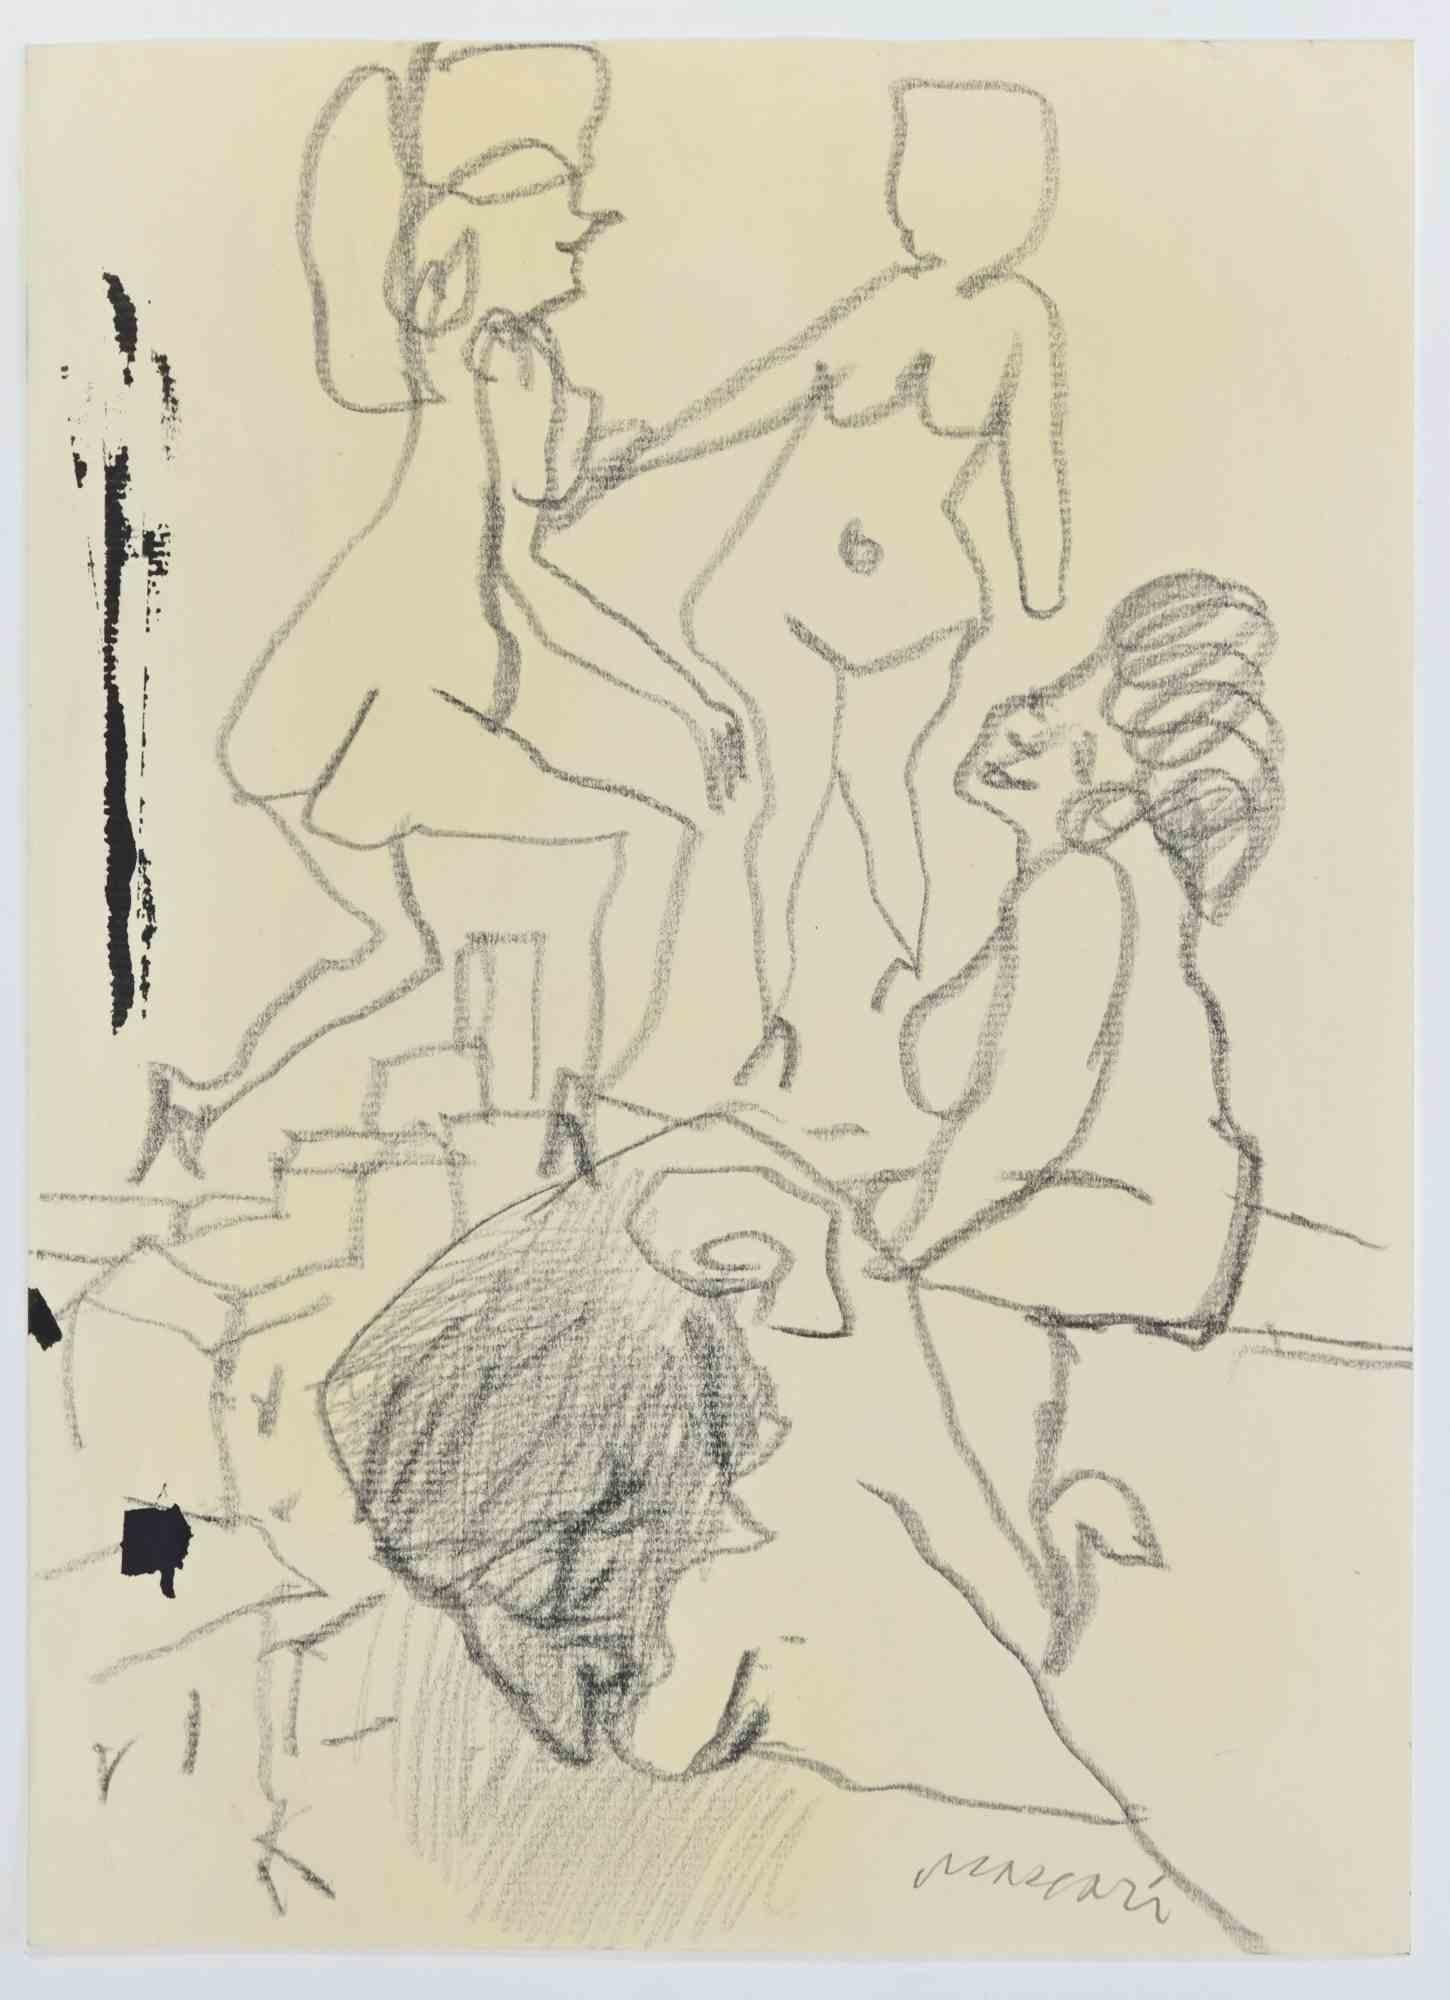 Erotic Scene is a Pencil Drawing realized by Mino Maccari  (1924-1989) in the 1960s.

Hand-signed on the lower margin.

Good condition.

Mino Maccari (Siena, 1924-Rome, June 16, 1989) was an Italian writer, painter, engraver and journalist, winner